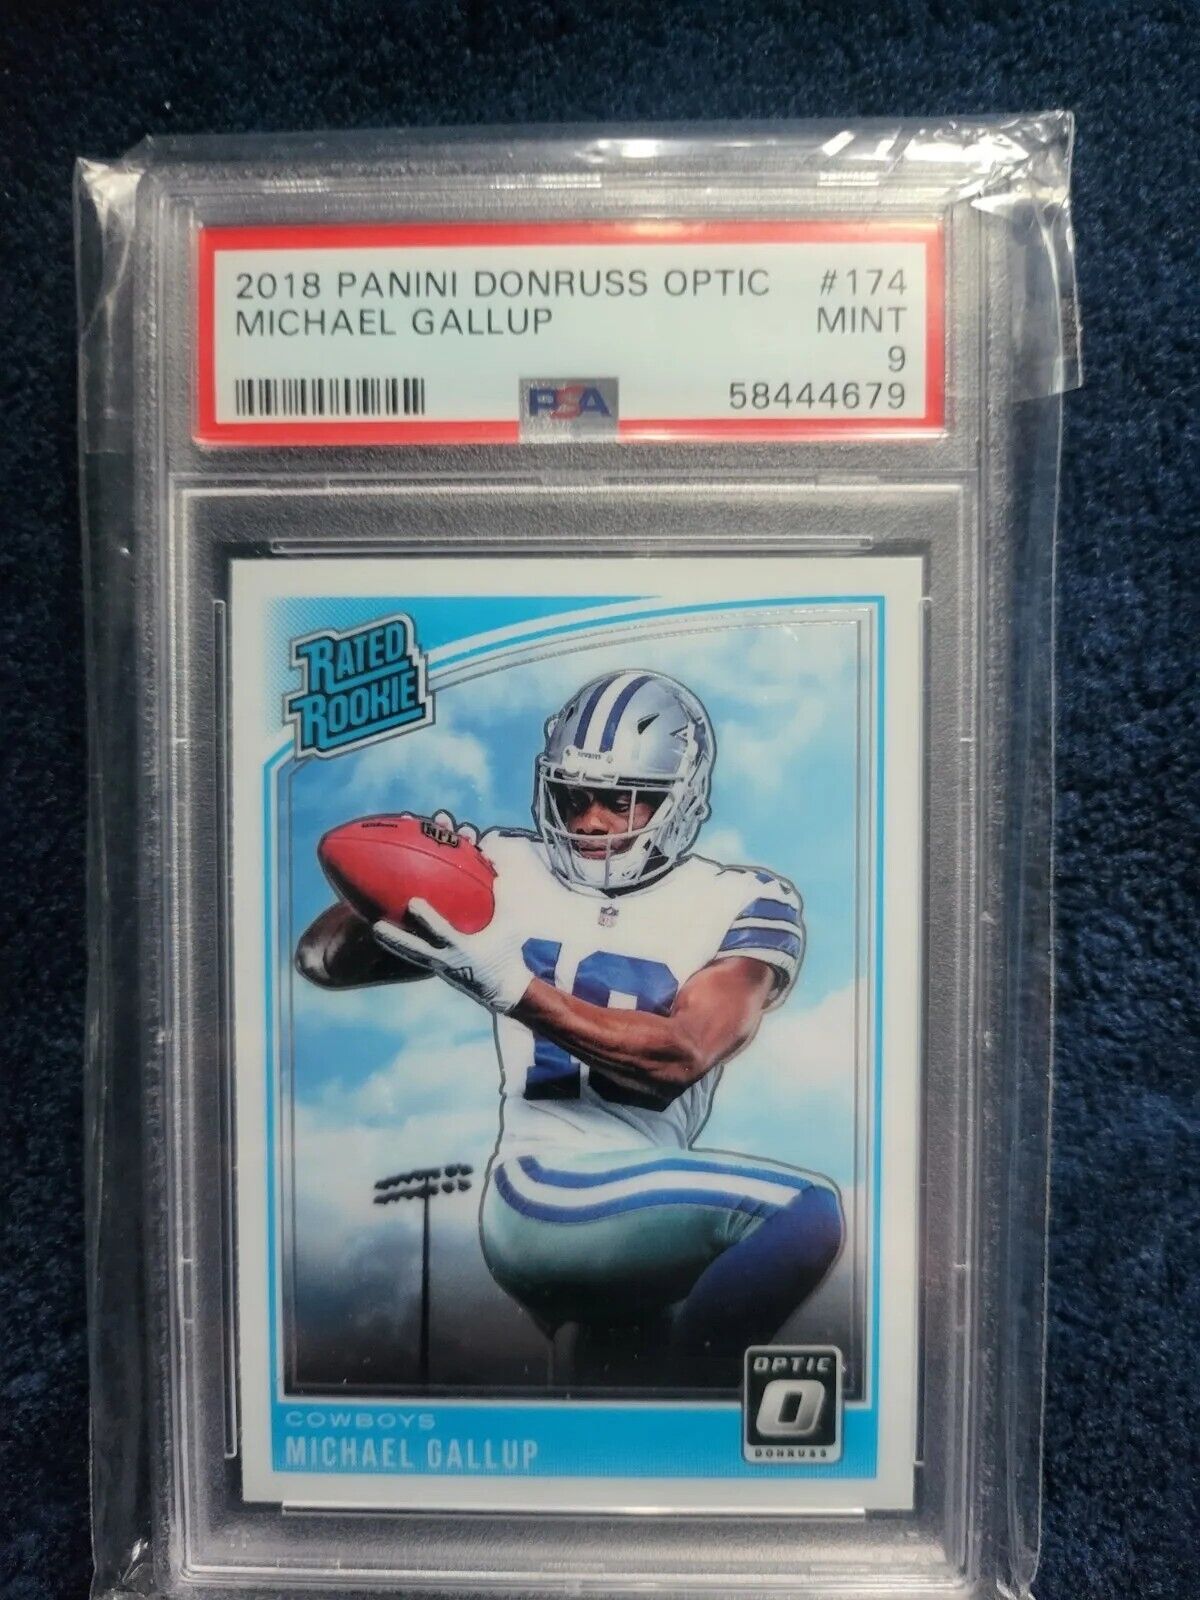 2018 Donruss Optic - Rated Rookie #174 Michael Gallup (RC)